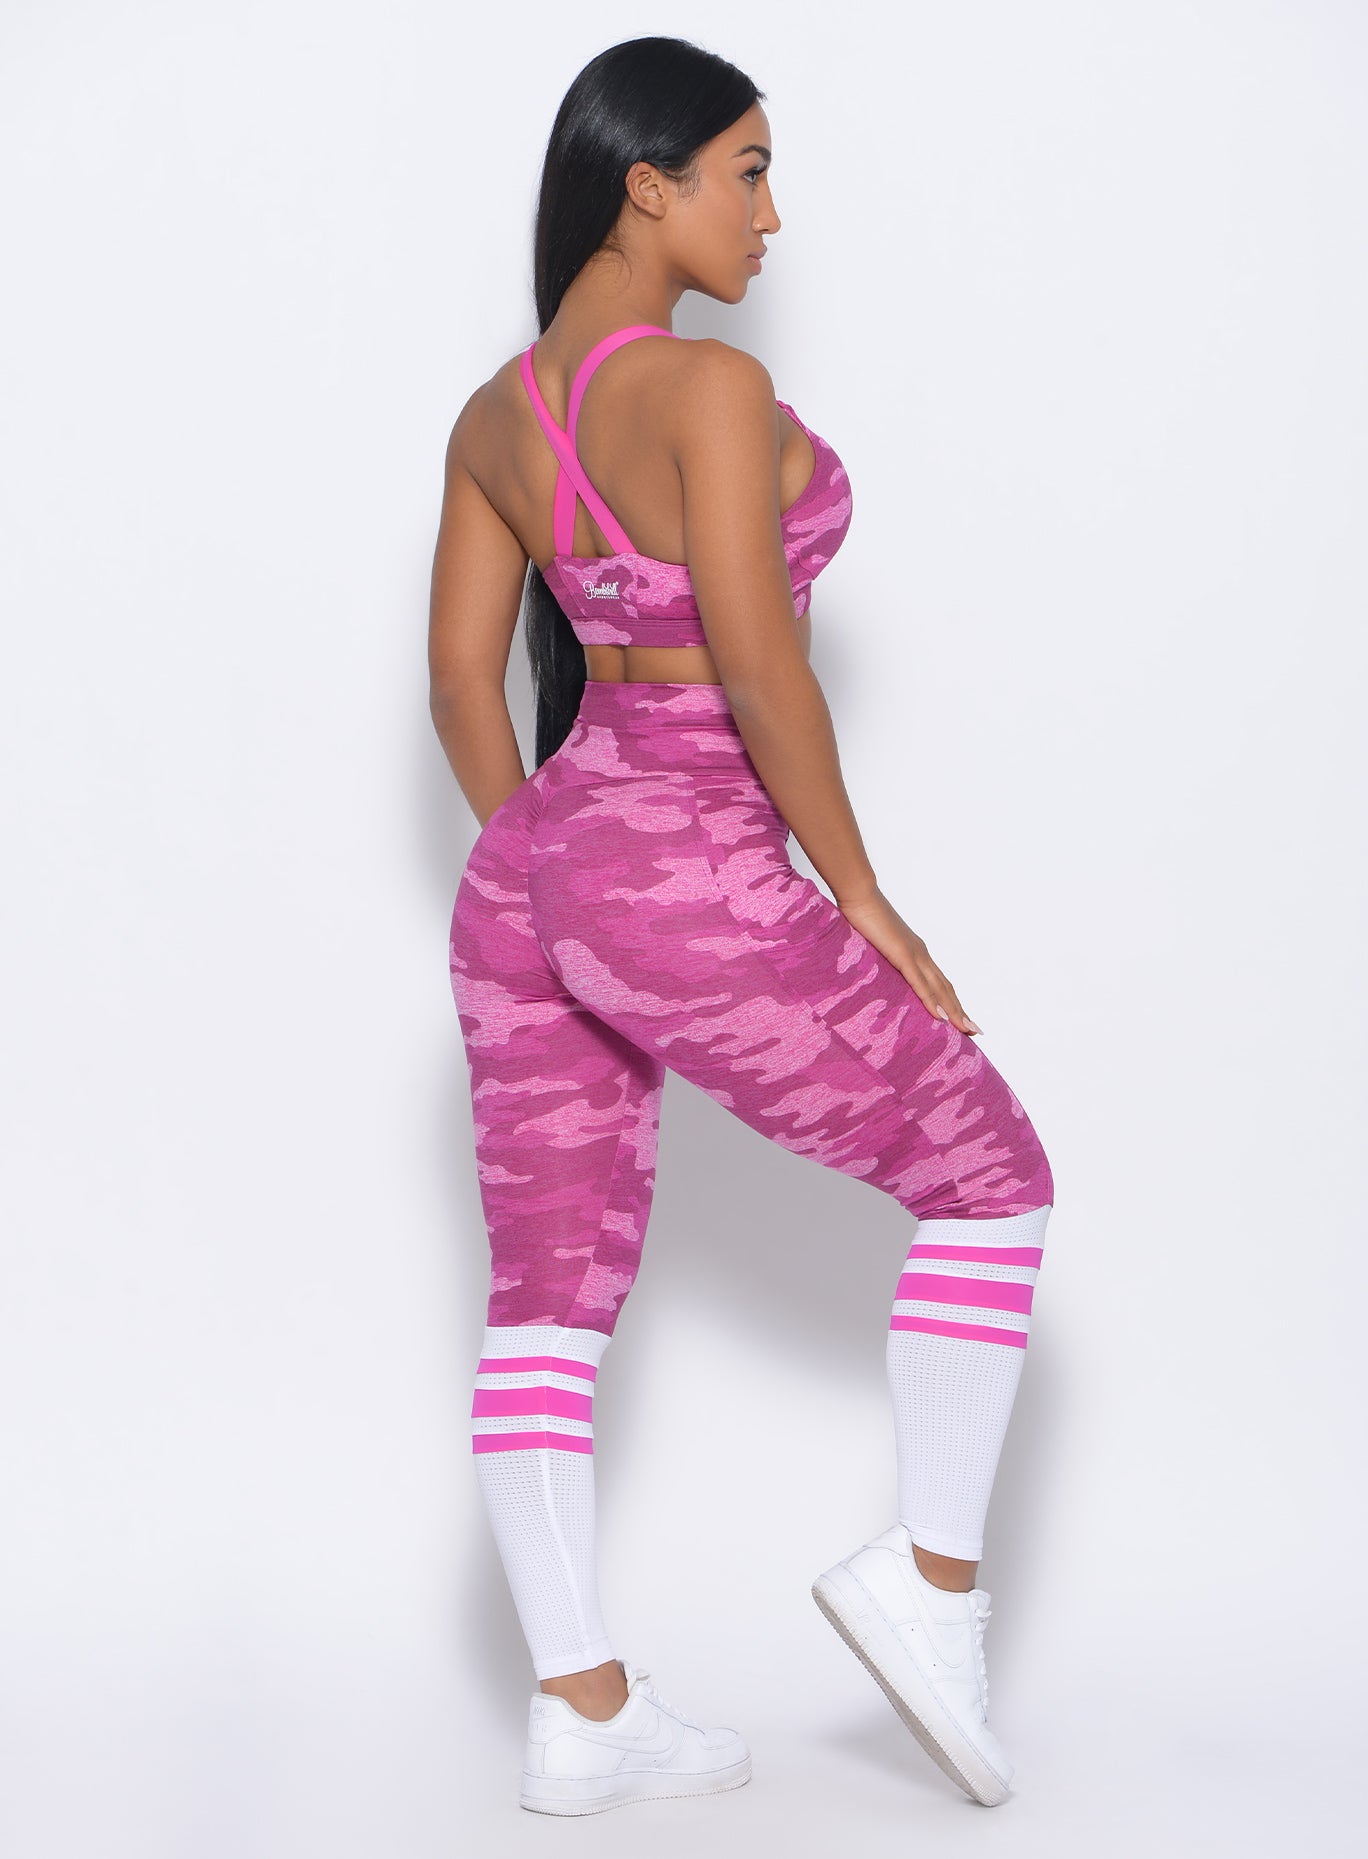 Right side  view of the model facing forward in our contour sock leggings in pink camo and a matching bra